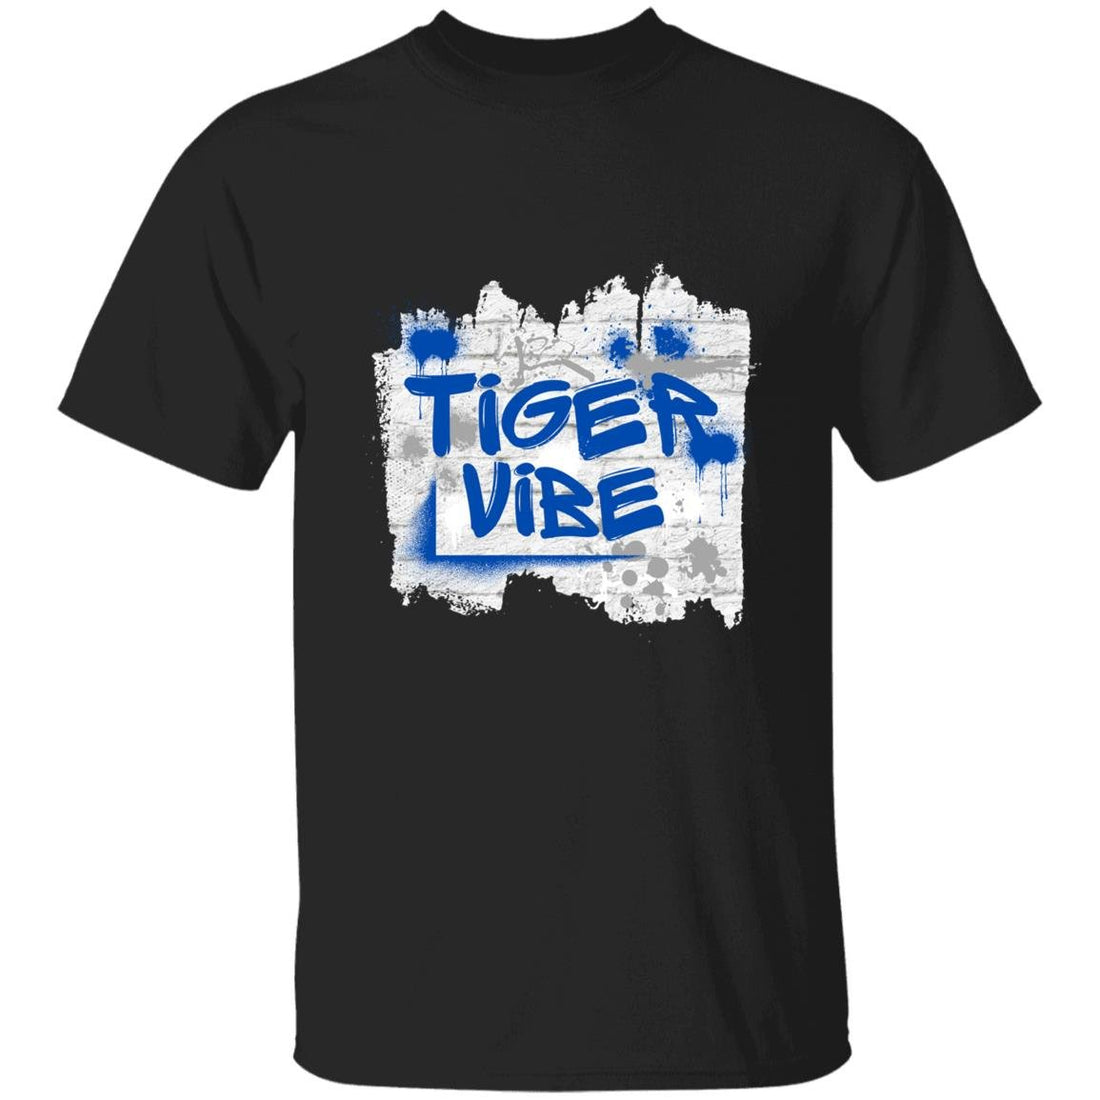 Tiger Vibe Youth T-Shirt - T-Shirts - Positively Sassy - Tiger Vibe Youth T-Shirt